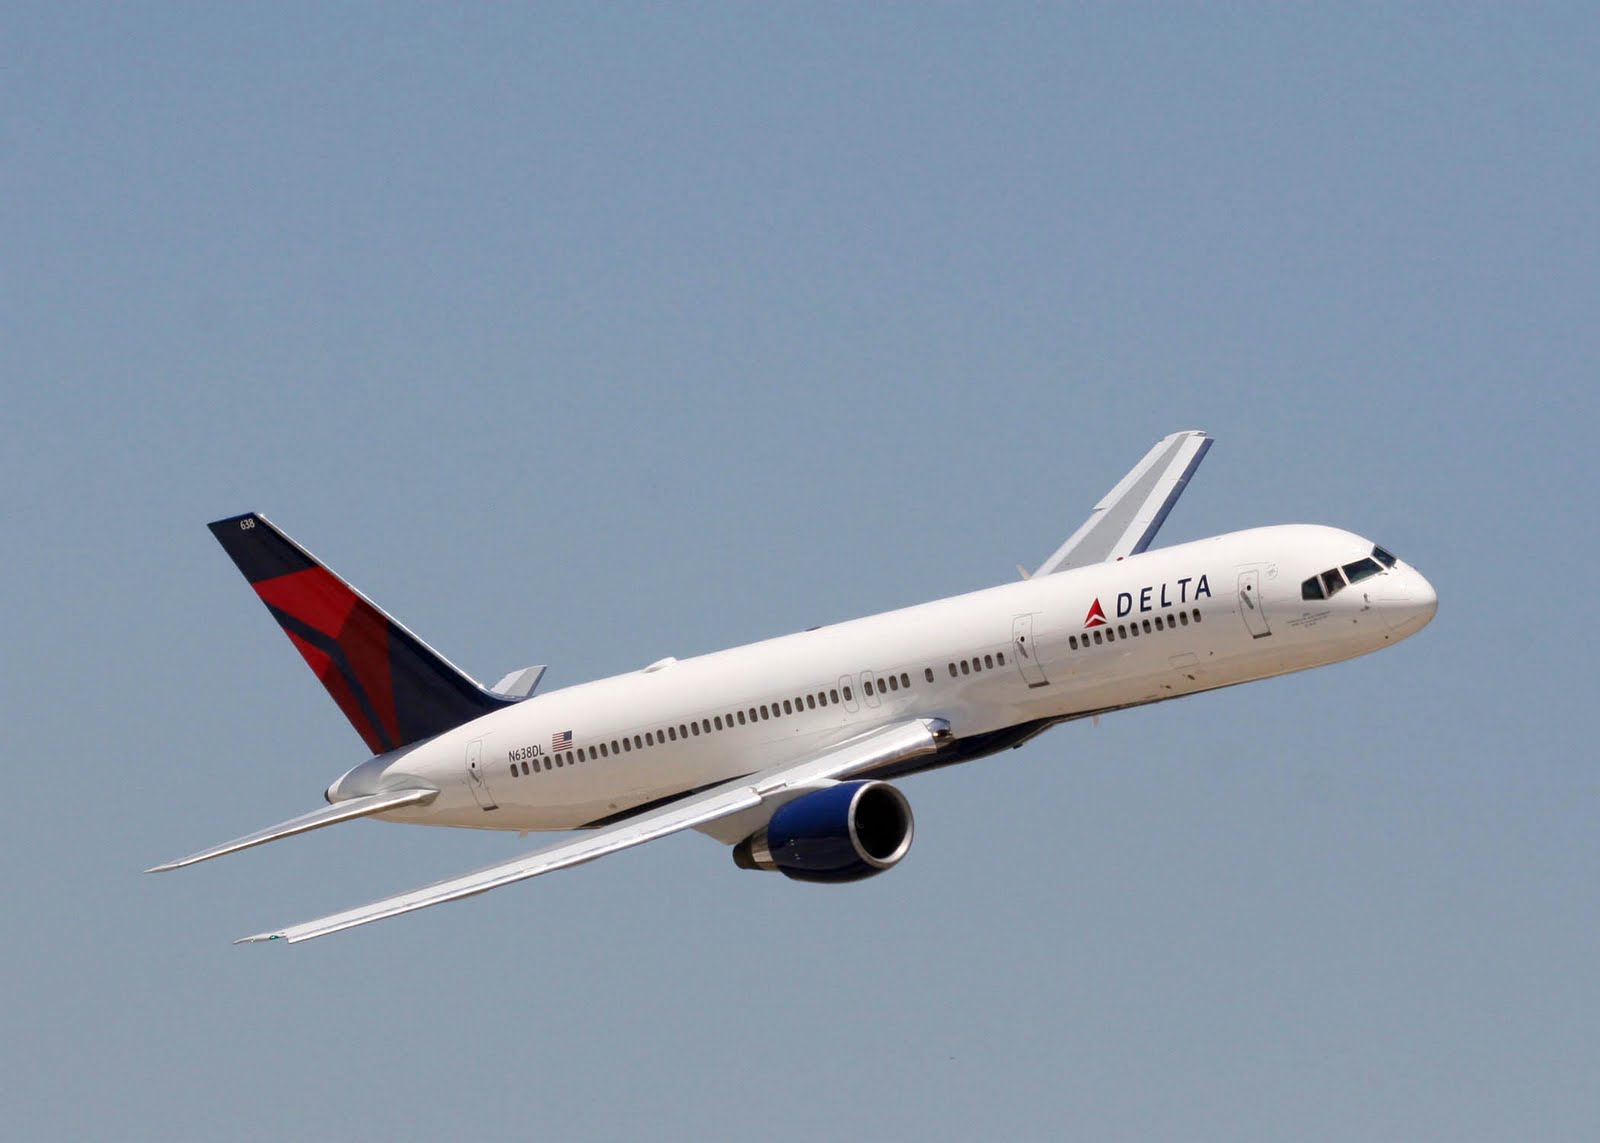 Jet Airlines: Delta Air Lines